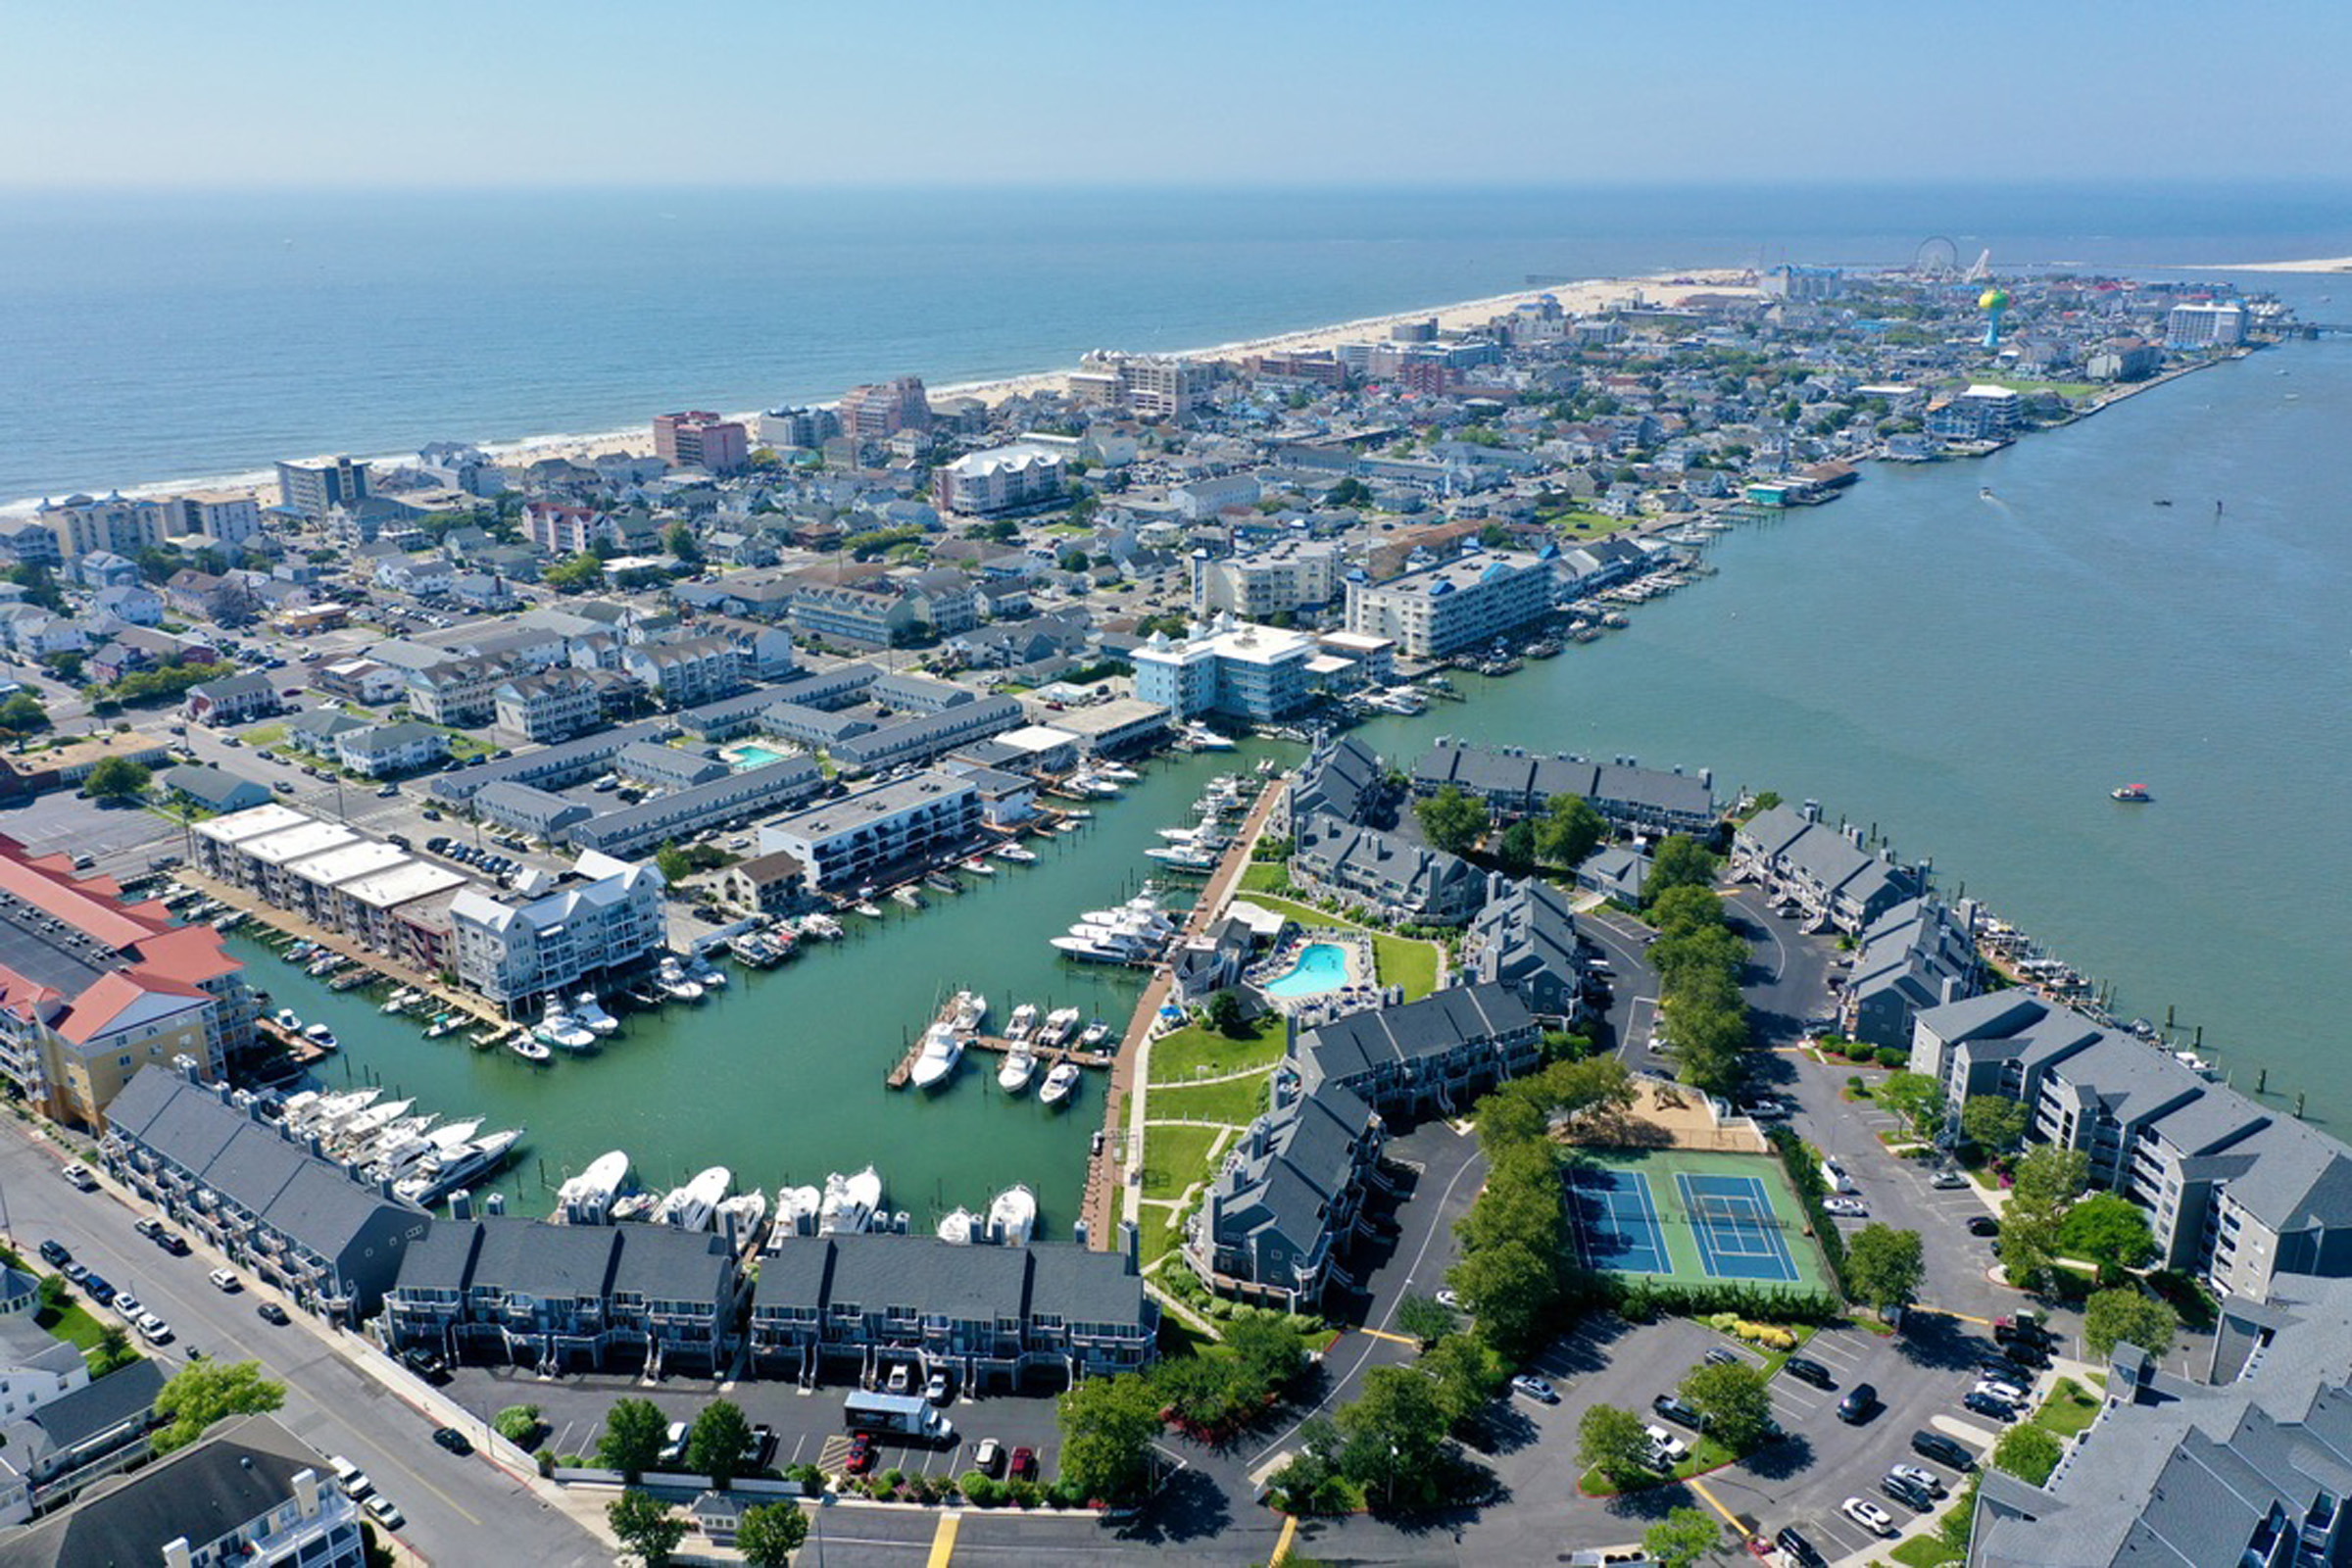 drone view showing Ocean City,MD.